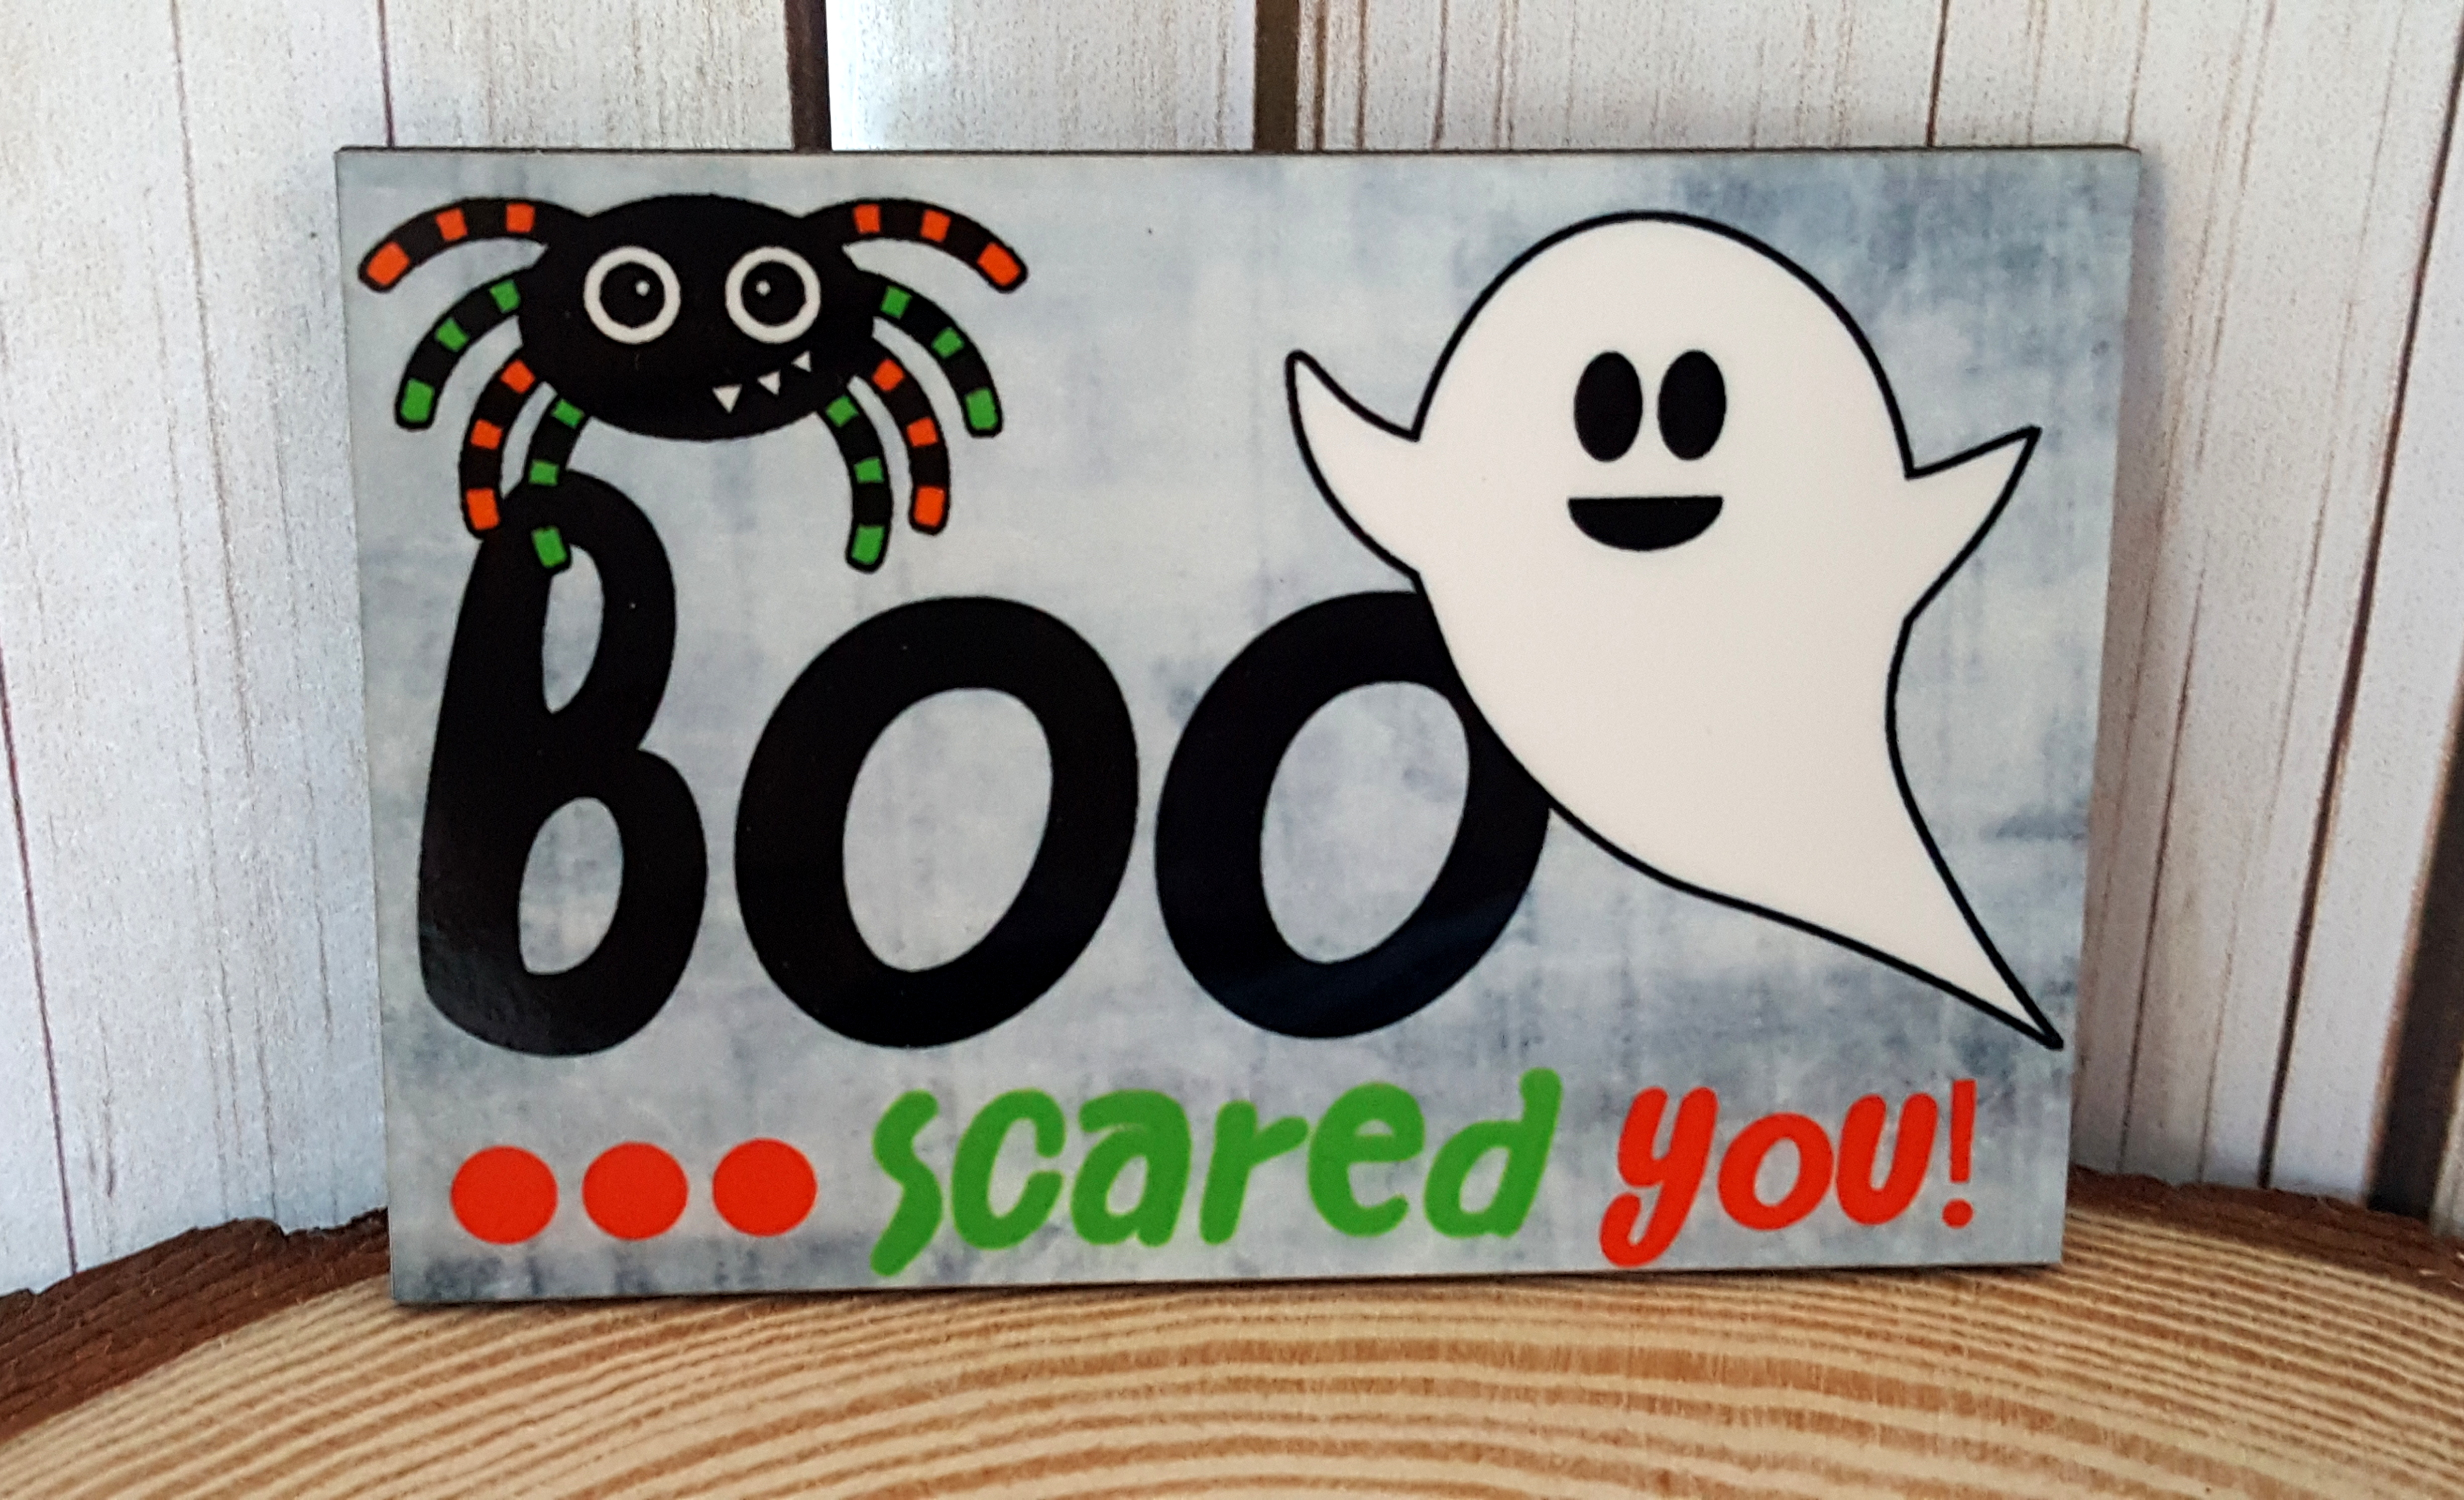 BOO Scared You made with sublimation printing